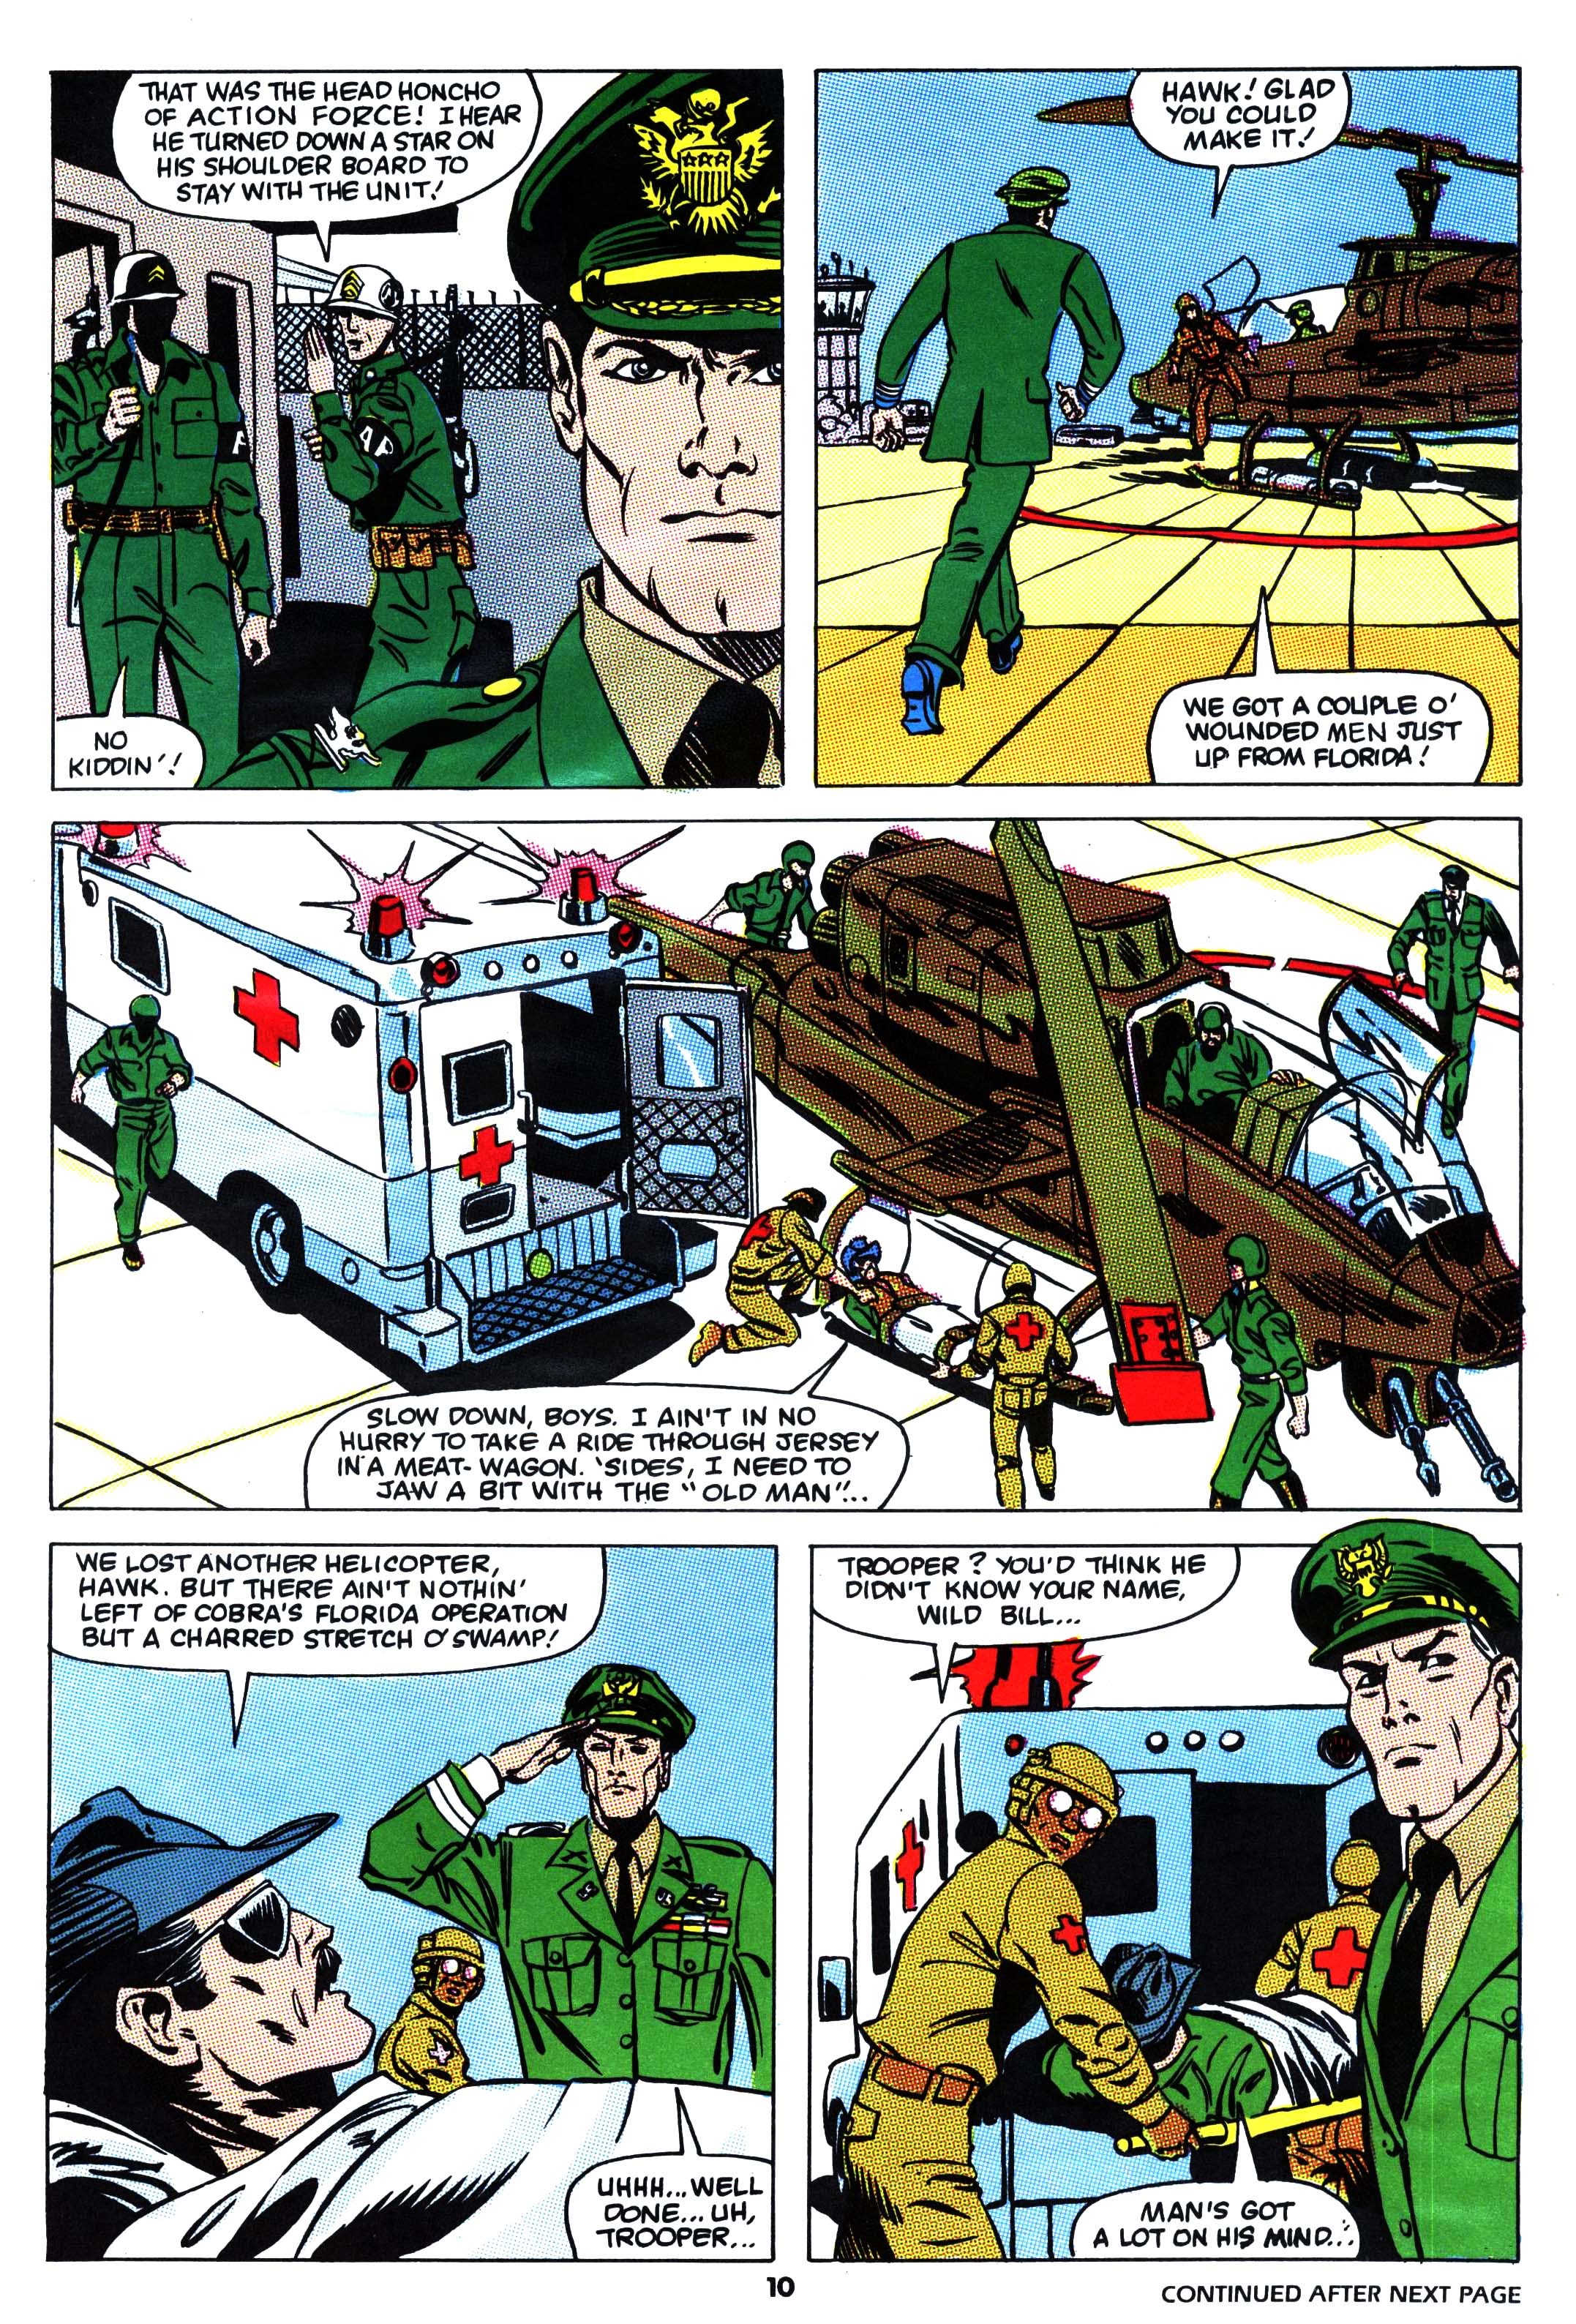 Read online Action Force comic -  Issue #20 - 10